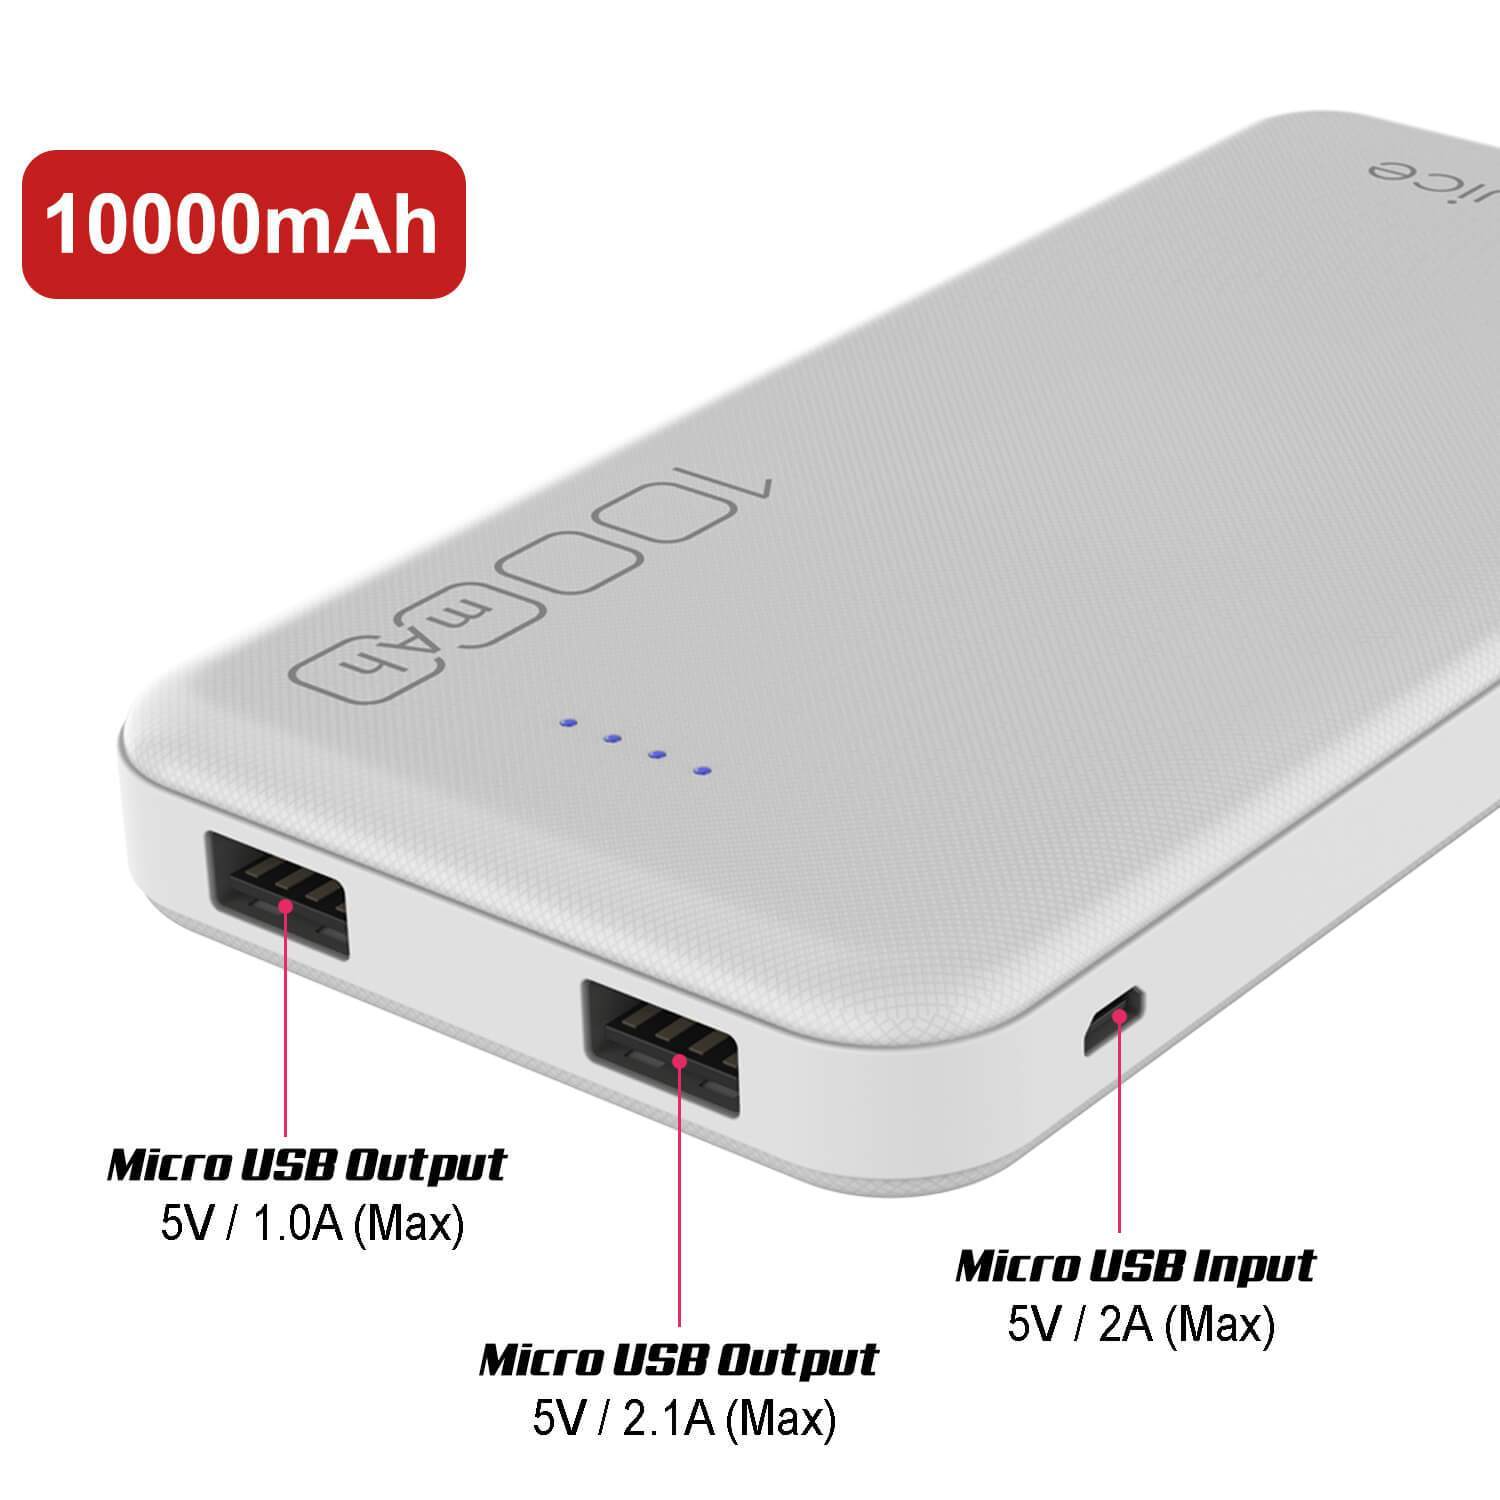 PunkCase PowerBank 10000mah Battery Pack for iPhone X/XS/Max/XR / 11/10, iPad, Samsung Galaxy S10 / S9 and Many More [White]